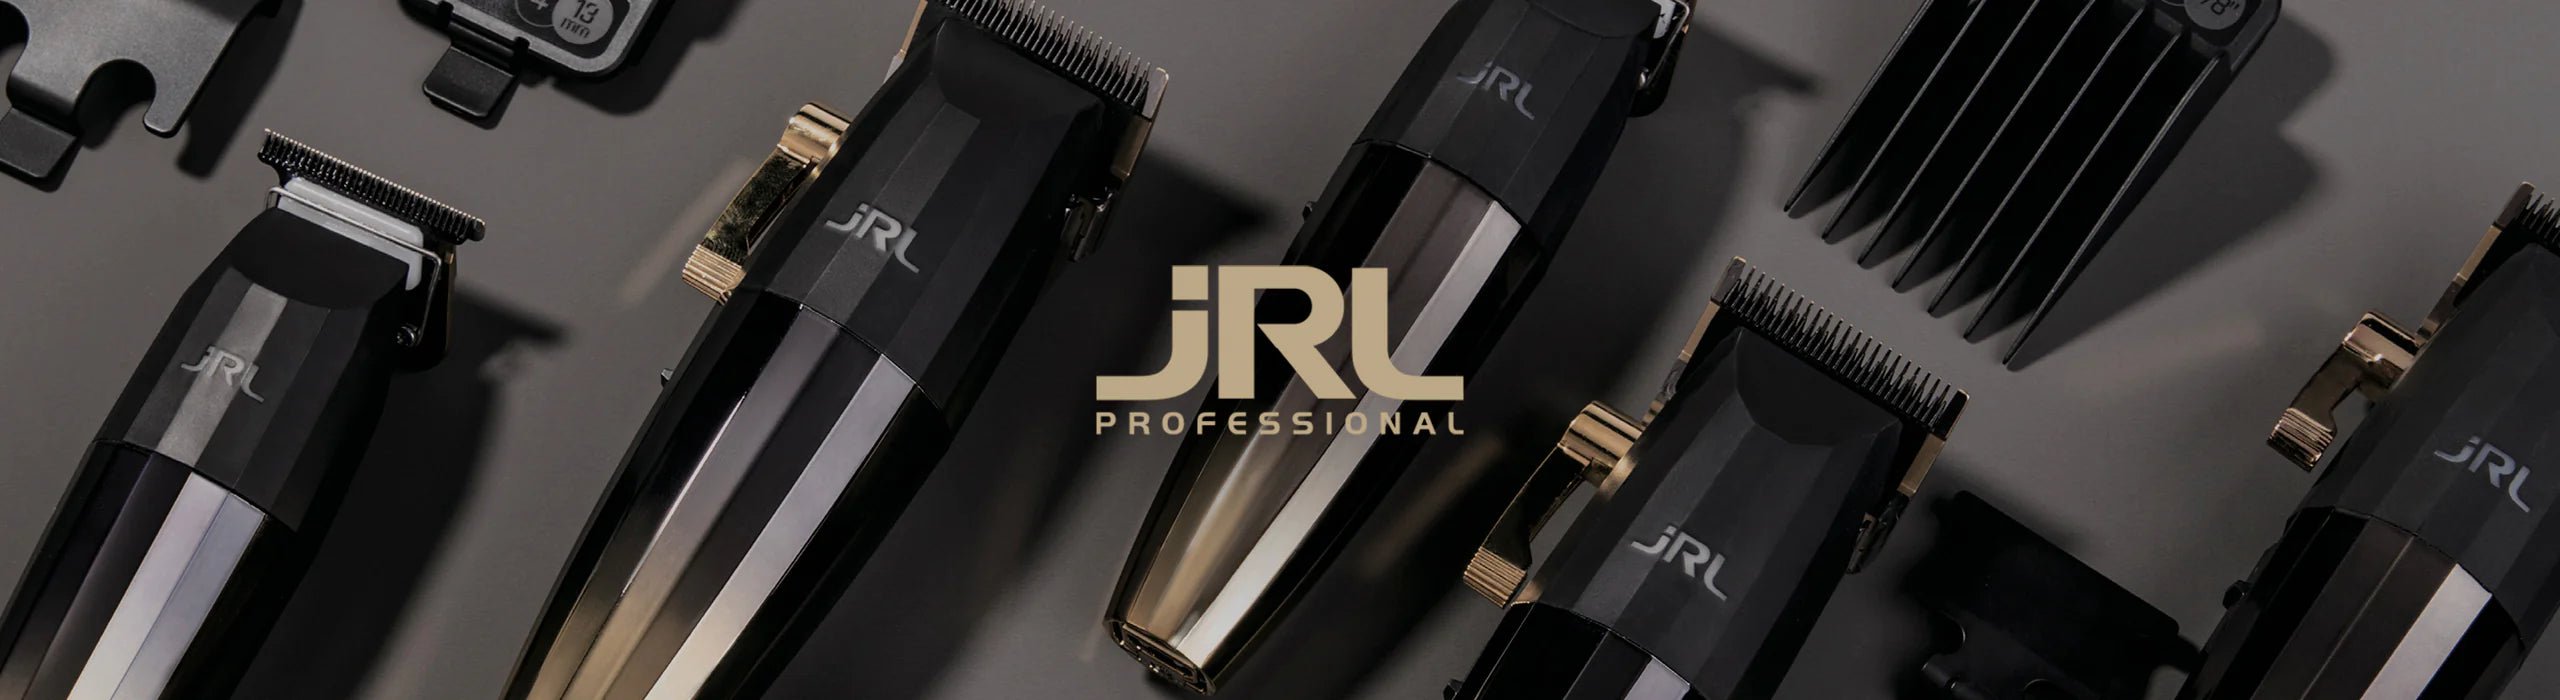 Jrl Professional ✔️ Acquista Trimmer Clipper Tosatrici Professionali -  Planethair